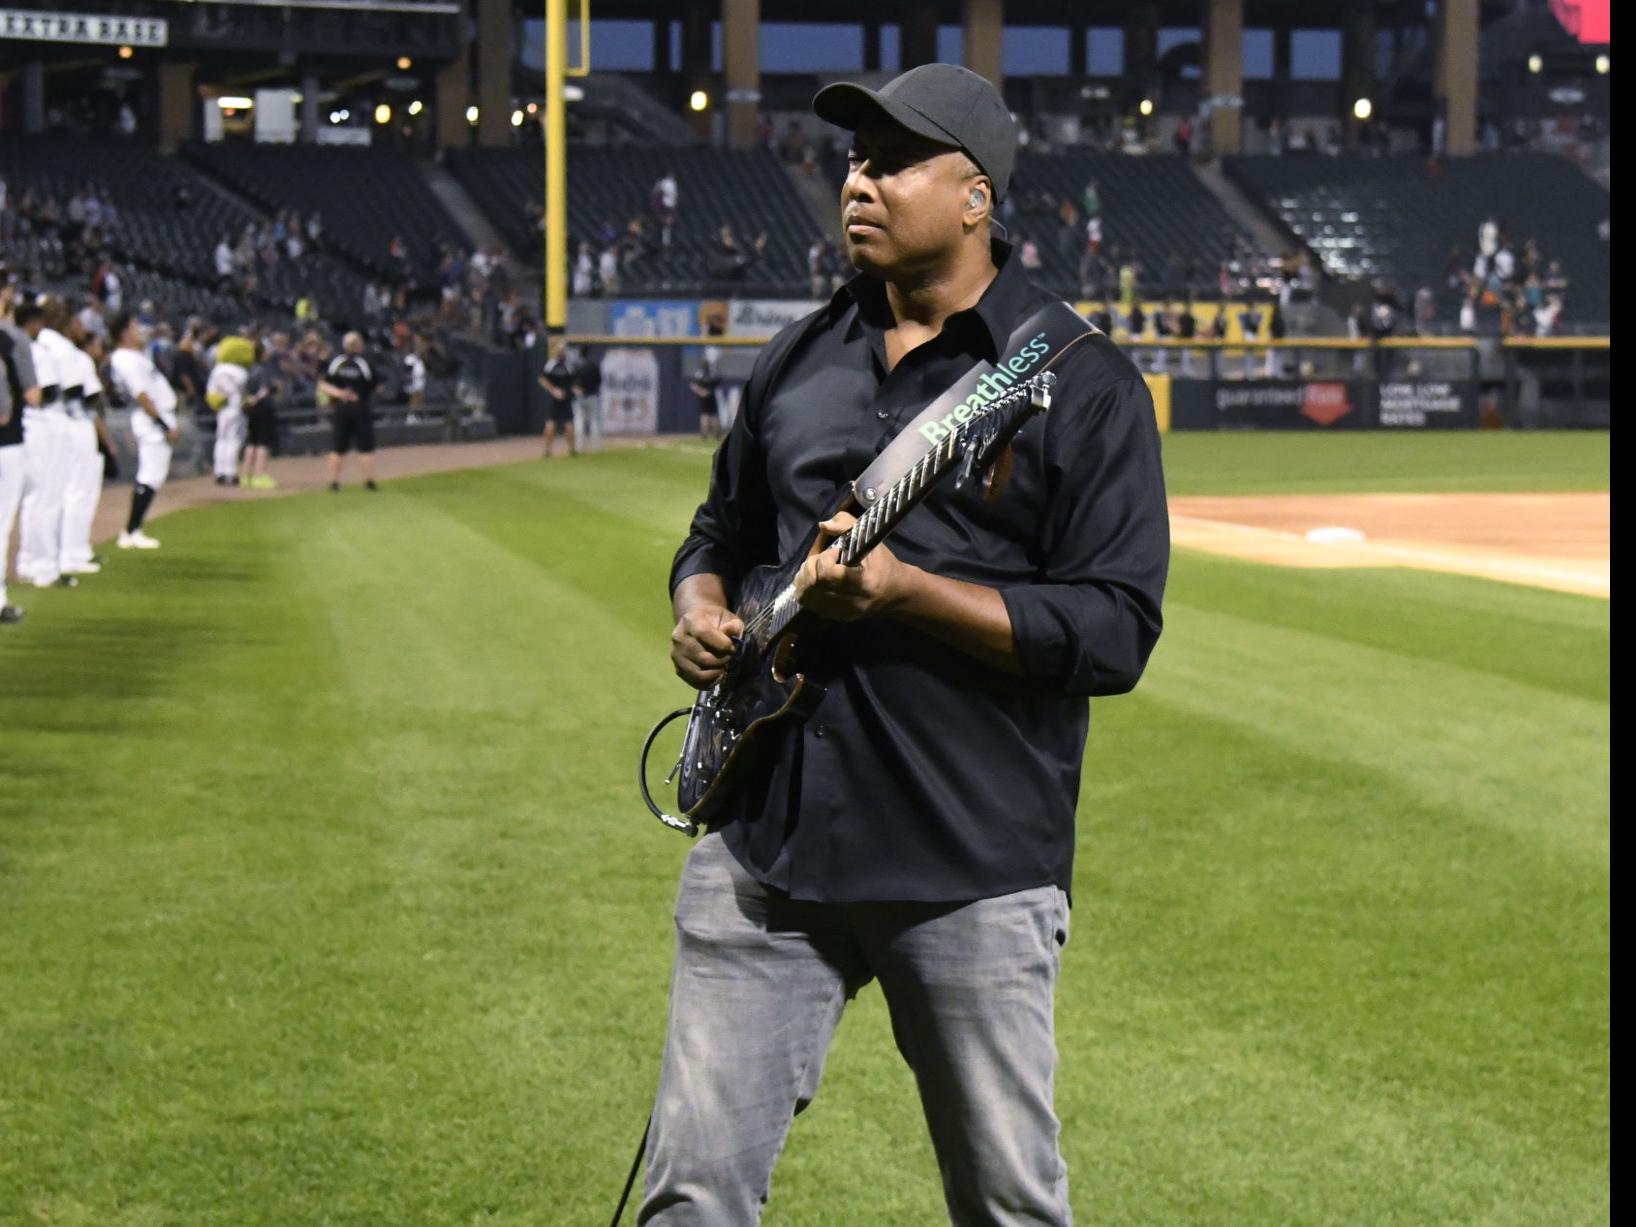 Yankees great Bernie Williams will bring personal message to Sky Sox crowd, Sports